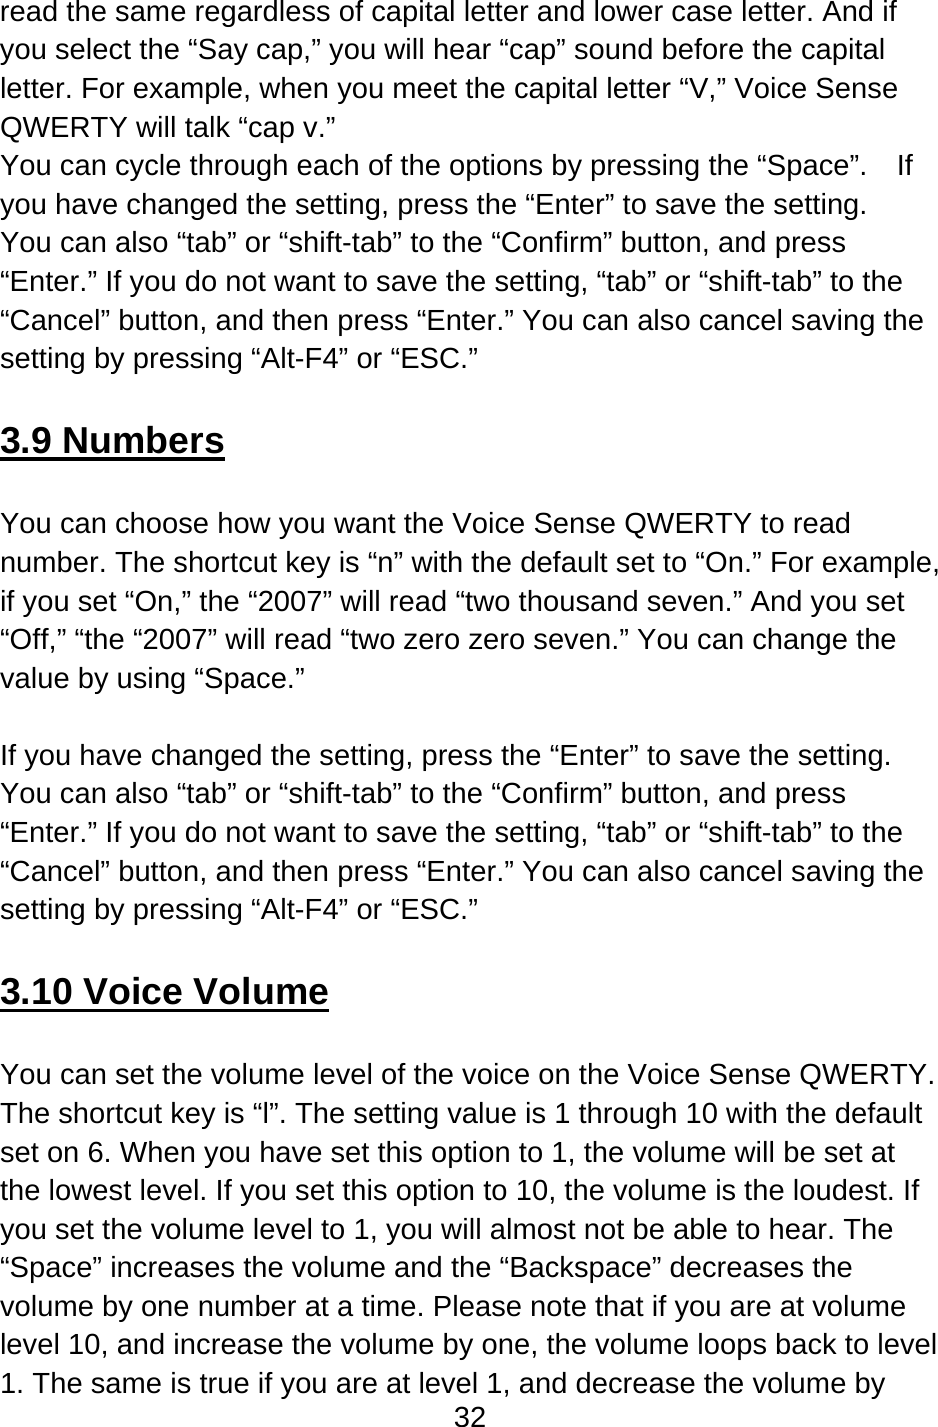 32  read the same regardless of capital letter and lower case letter. And if you select the “Say cap,” you will hear “cap” sound before the capital letter. For example, when you meet the capital letter “V,” Voice Sense QWERTY will talk “cap v.” You can cycle through each of the options by pressing the “Space”.    If you have changed the setting, press the “Enter” to save the setting.   You can also “tab” or “shift-tab” to the “Confirm” button, and press “Enter.” If you do not want to save the setting, “tab” or “shift-tab” to the “Cancel” button, and then press “Enter.” You can also cancel saving the setting by pressing “Alt-F4” or “ESC.”  3.9 Numbers  You can choose how you want the Voice Sense QWERTY to read number. The shortcut key is “n” with the default set to “On.” For example, if you set “On,” the “2007” will read “two thousand seven.” And you set “Off,” “the “2007” will read “two zero zero seven.” You can change the value by using “Space.”  If you have changed the setting, press the “Enter” to save the setting.   You can also “tab” or “shift-tab” to the “Confirm” button, and press “Enter.” If you do not want to save the setting, “tab” or “shift-tab” to the “Cancel” button, and then press “Enter.” You can also cancel saving the setting by pressing “Alt-F4” or “ESC.”  3.10 Voice Volume  You can set the volume level of the voice on the Voice Sense QWERTY. The shortcut key is “l”. The setting value is 1 through 10 with the default set on 6. When you have set this option to 1, the volume will be set at the lowest level. If you set this option to 10, the volume is the loudest. If you set the volume level to 1, you will almost not be able to hear. The “Space” increases the volume and the “Backspace” decreases the volume by one number at a time. Please note that if you are at volume level 10, and increase the volume by one, the volume loops back to level 1. The same is true if you are at level 1, and decrease the volume by 